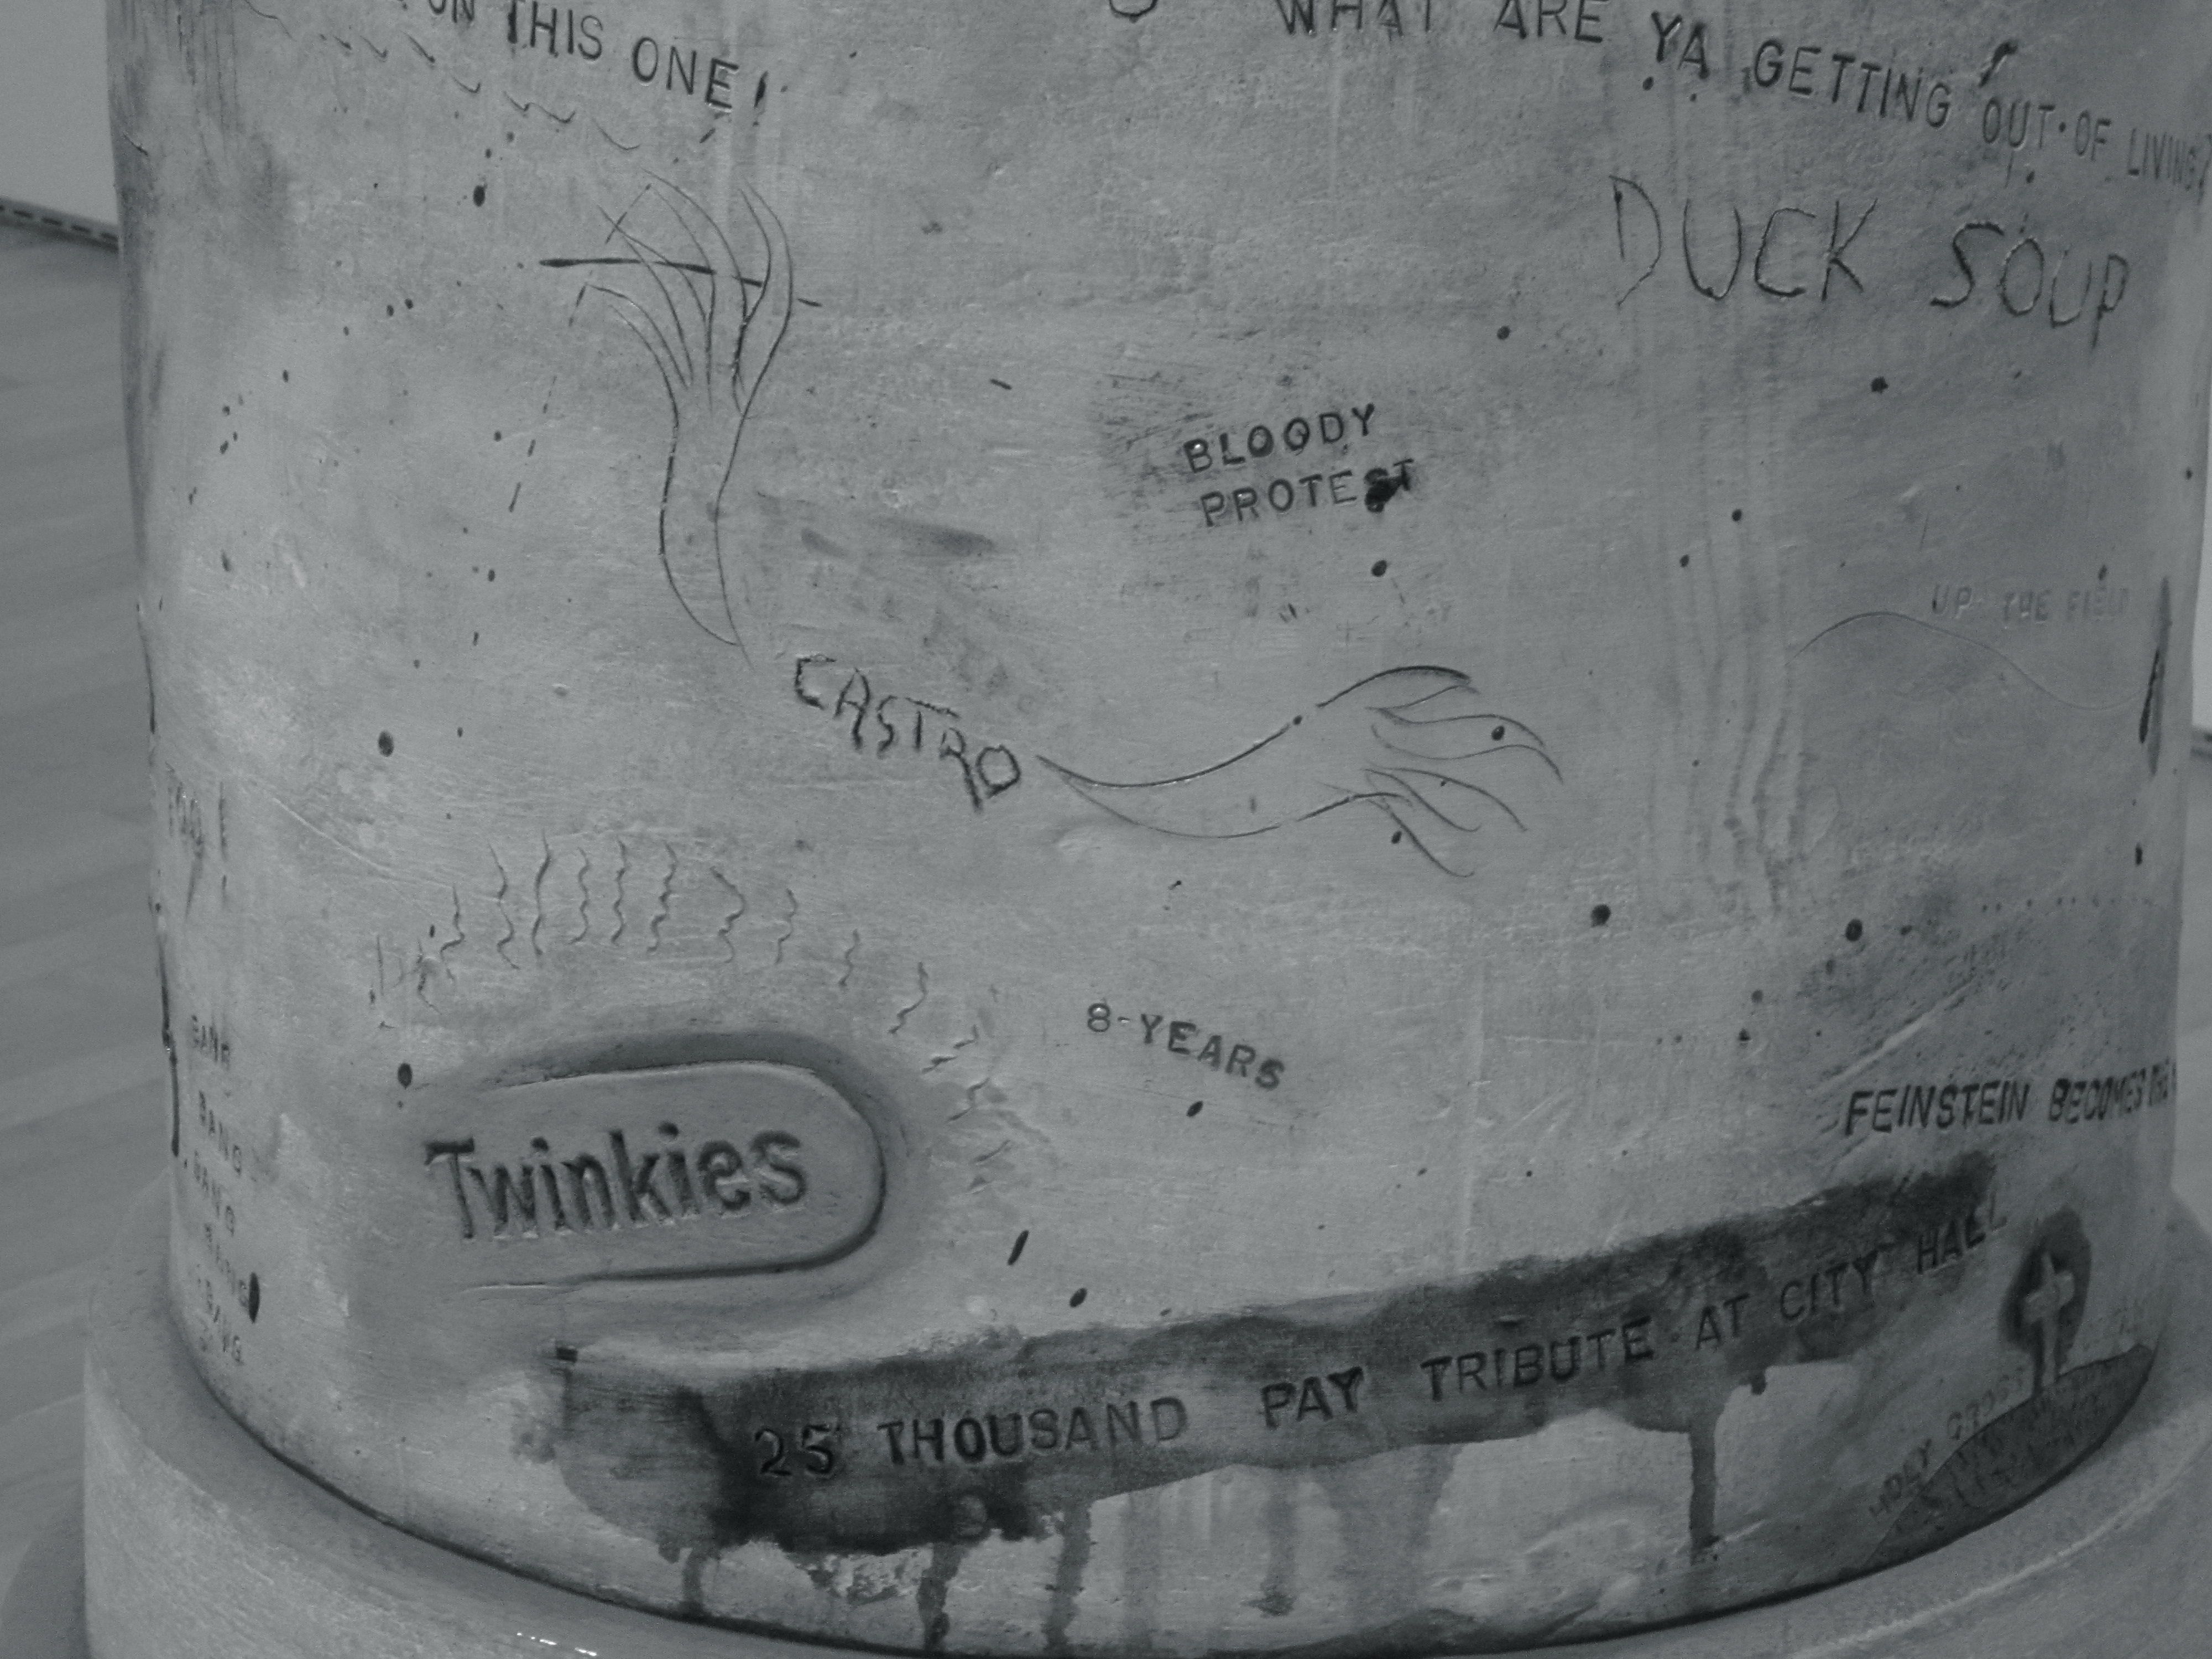 Figure 3 This is a close-up photo of the pedestal from the Moscone bust sculpture. There are rough carvings in the pedestal including words that reference the assassinations like “twinkies” and “bang, bang, bang.”